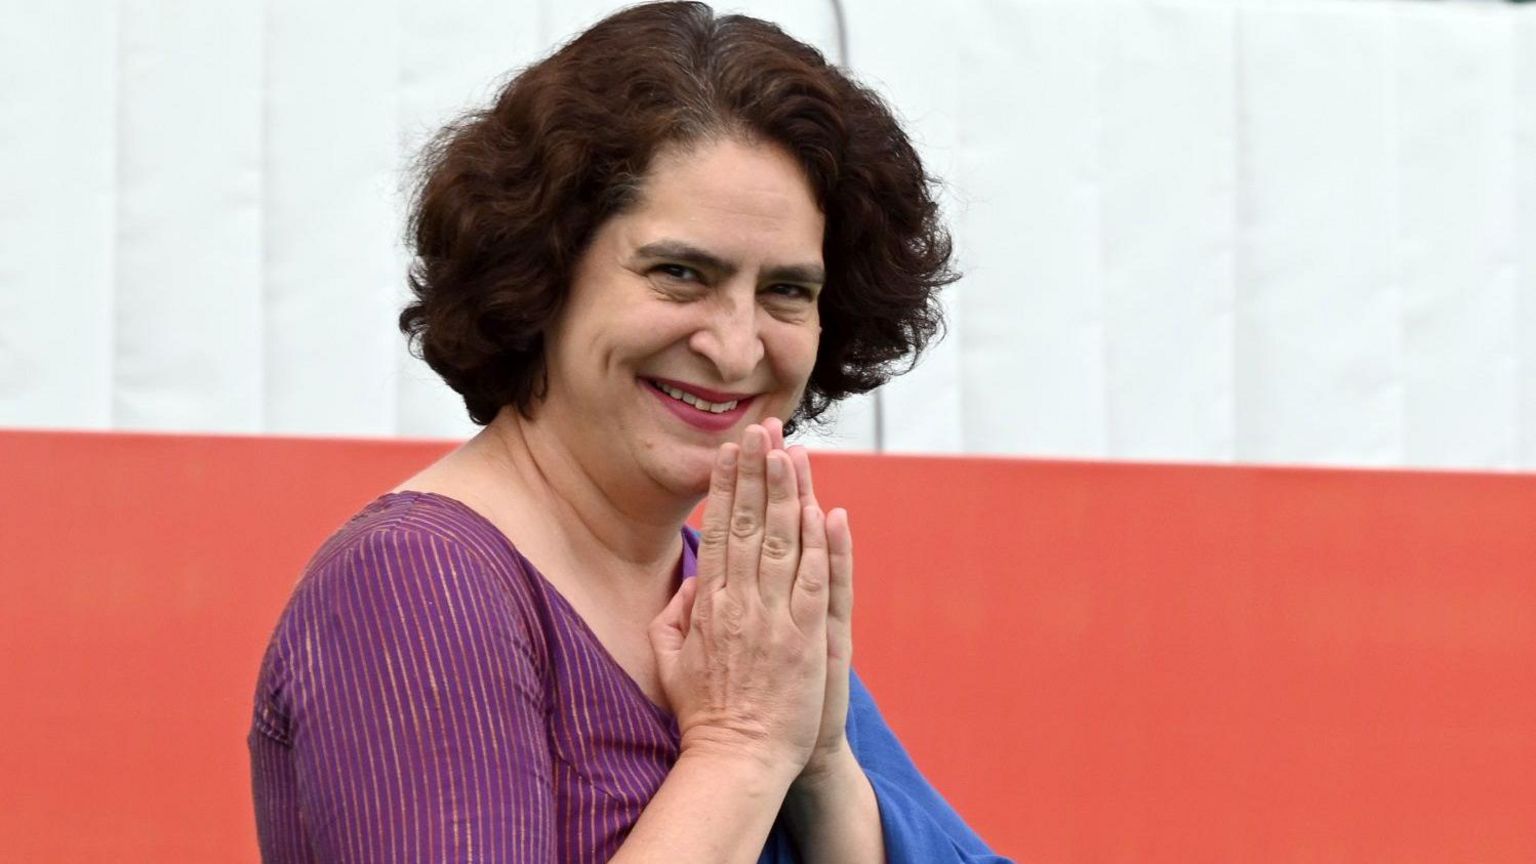 Congress general secretary Priyanka Gandhi Vadra folds hands at the launch of the party's manifesto for the 2024 elections, at the Congress headquarters on 5 April 2024 in New Delhi